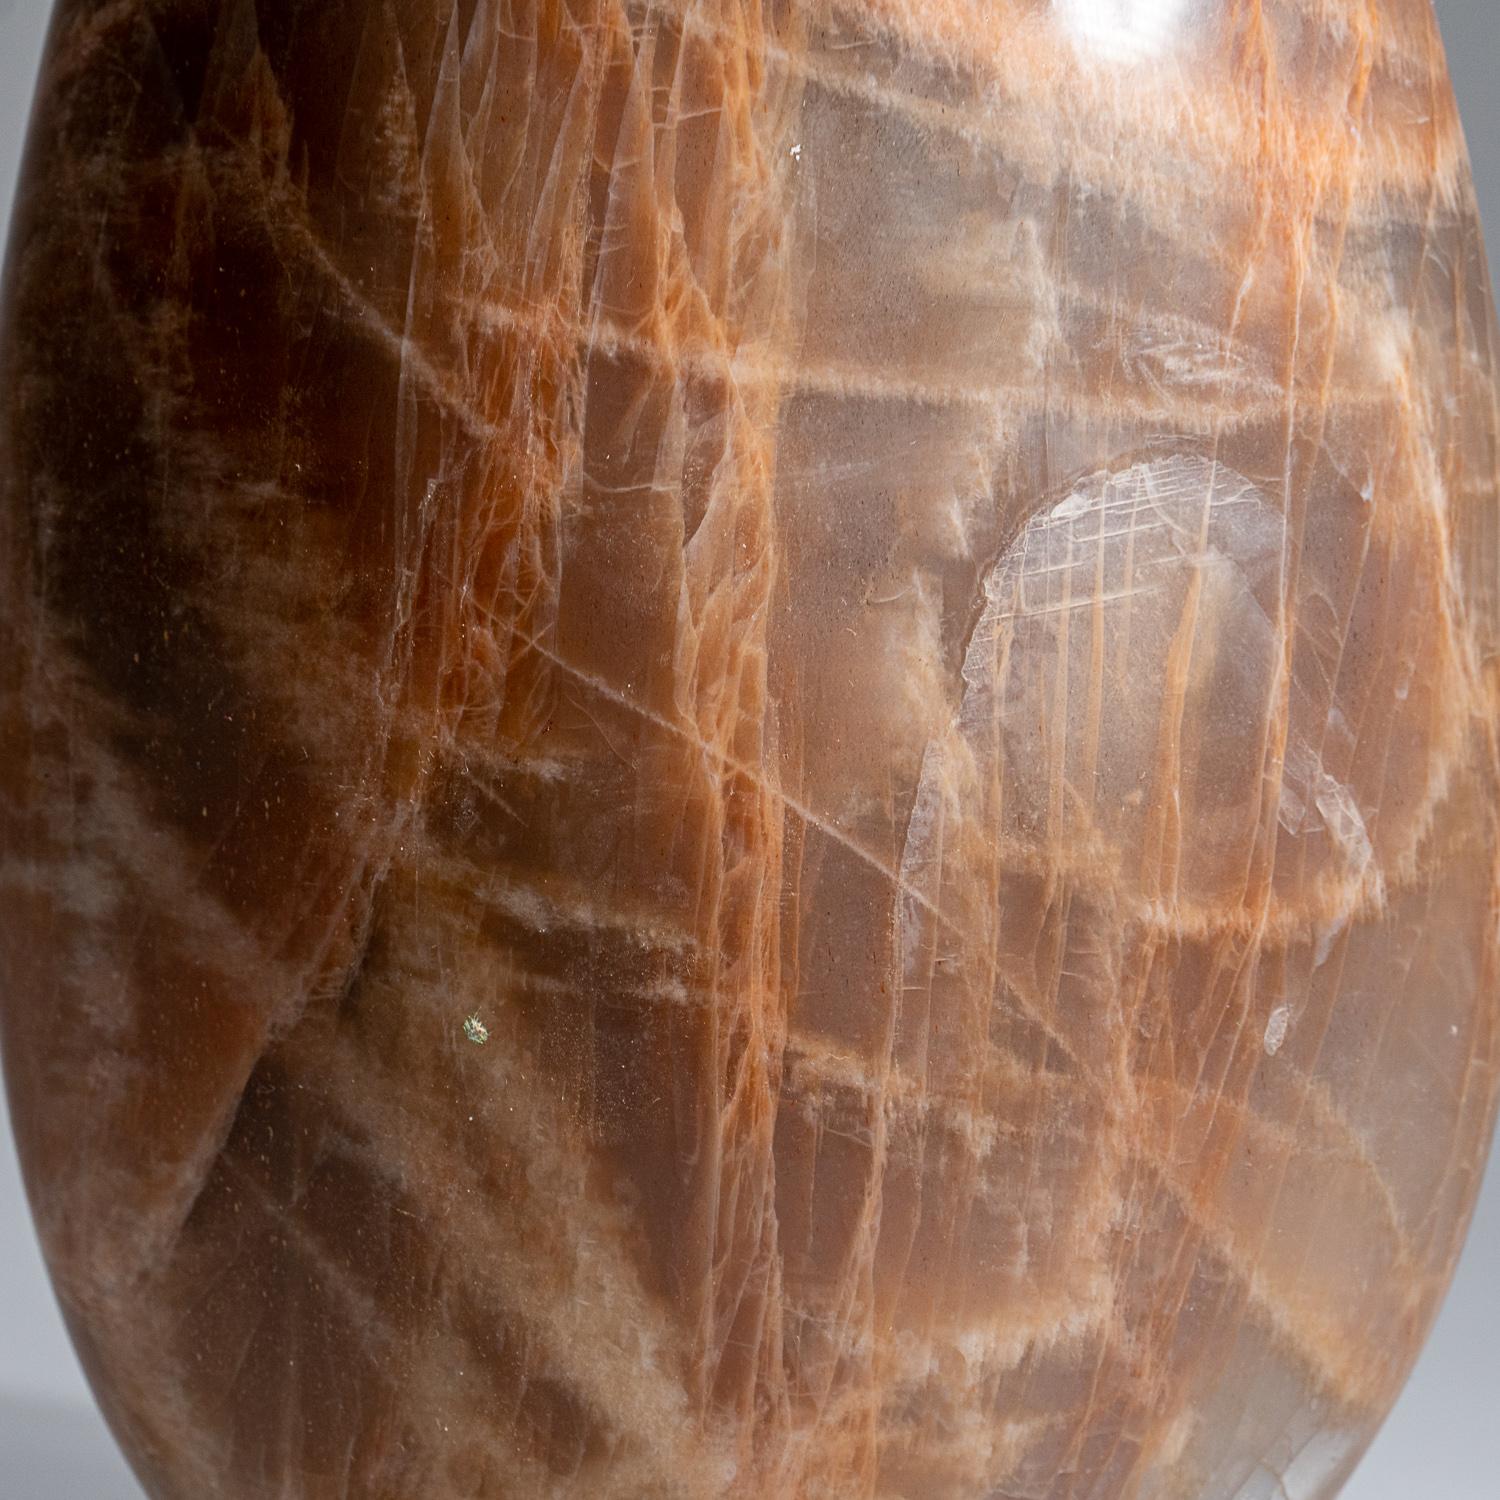 AAA quality, polished Peach Moonstone freeform from Madagascar. Composed of potassium aluminum silicate feldspar, this variety of Moonstone has typically tan-brown to light peach/pink hues. Polished to smooth mirror finish and is a perfect addition